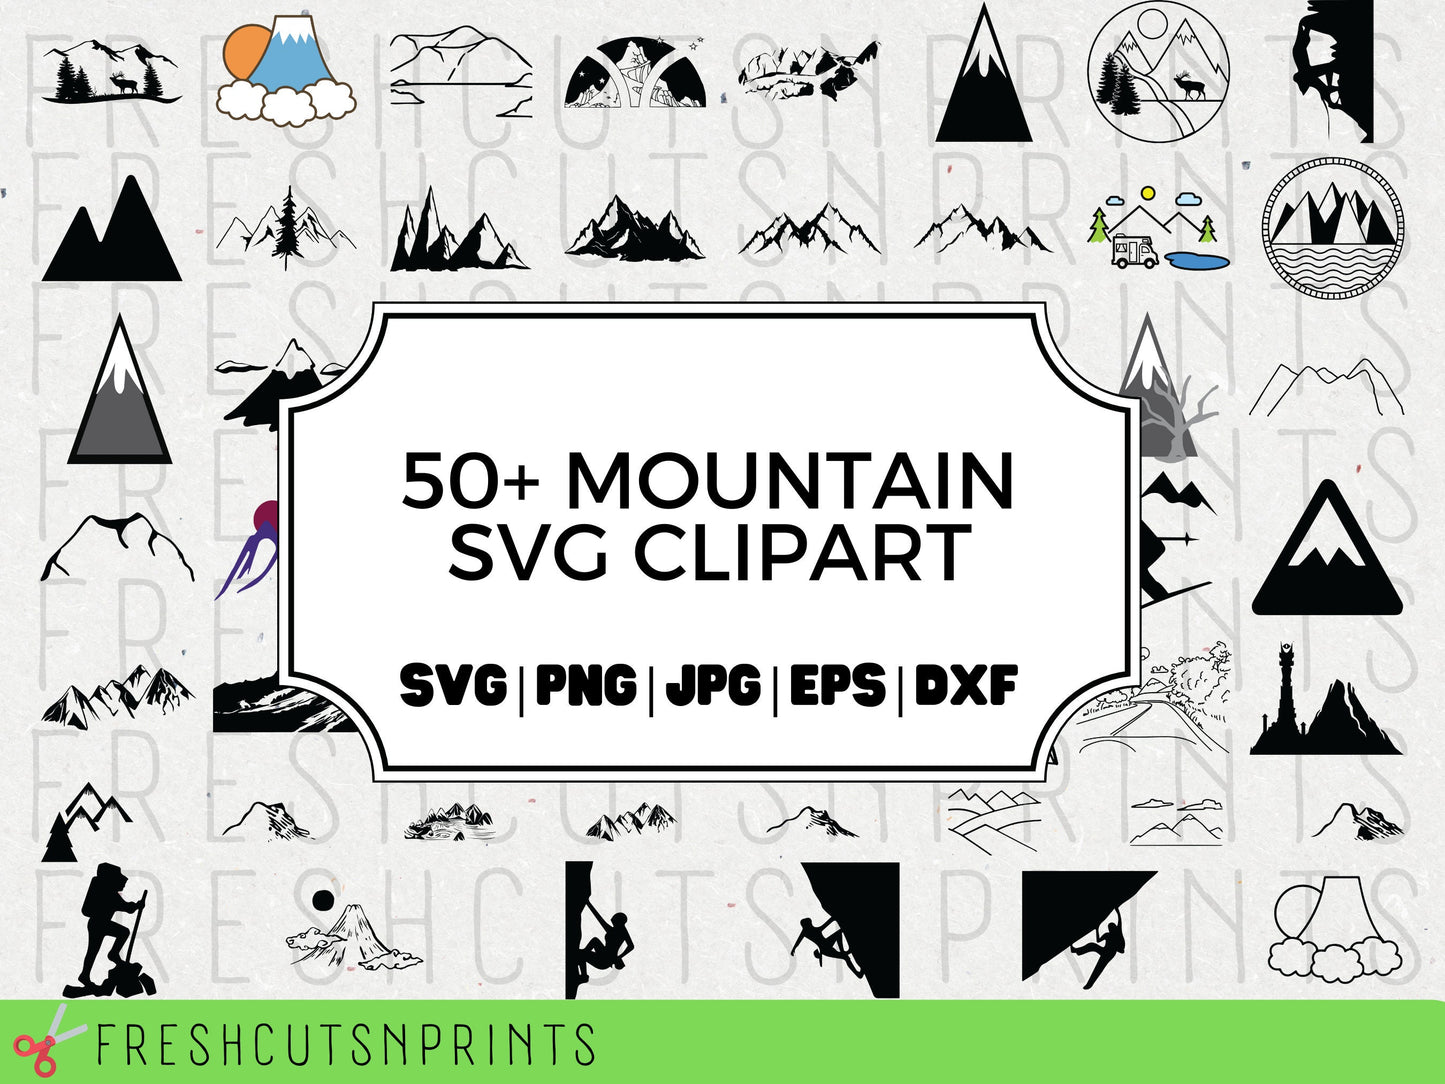 50+ Mountain SVG Bundle , Mountain clipart, Mountain Cut file, Mountain Silhouette, Mountain Vector, Mountain Decal, Hiking svg, camping svg